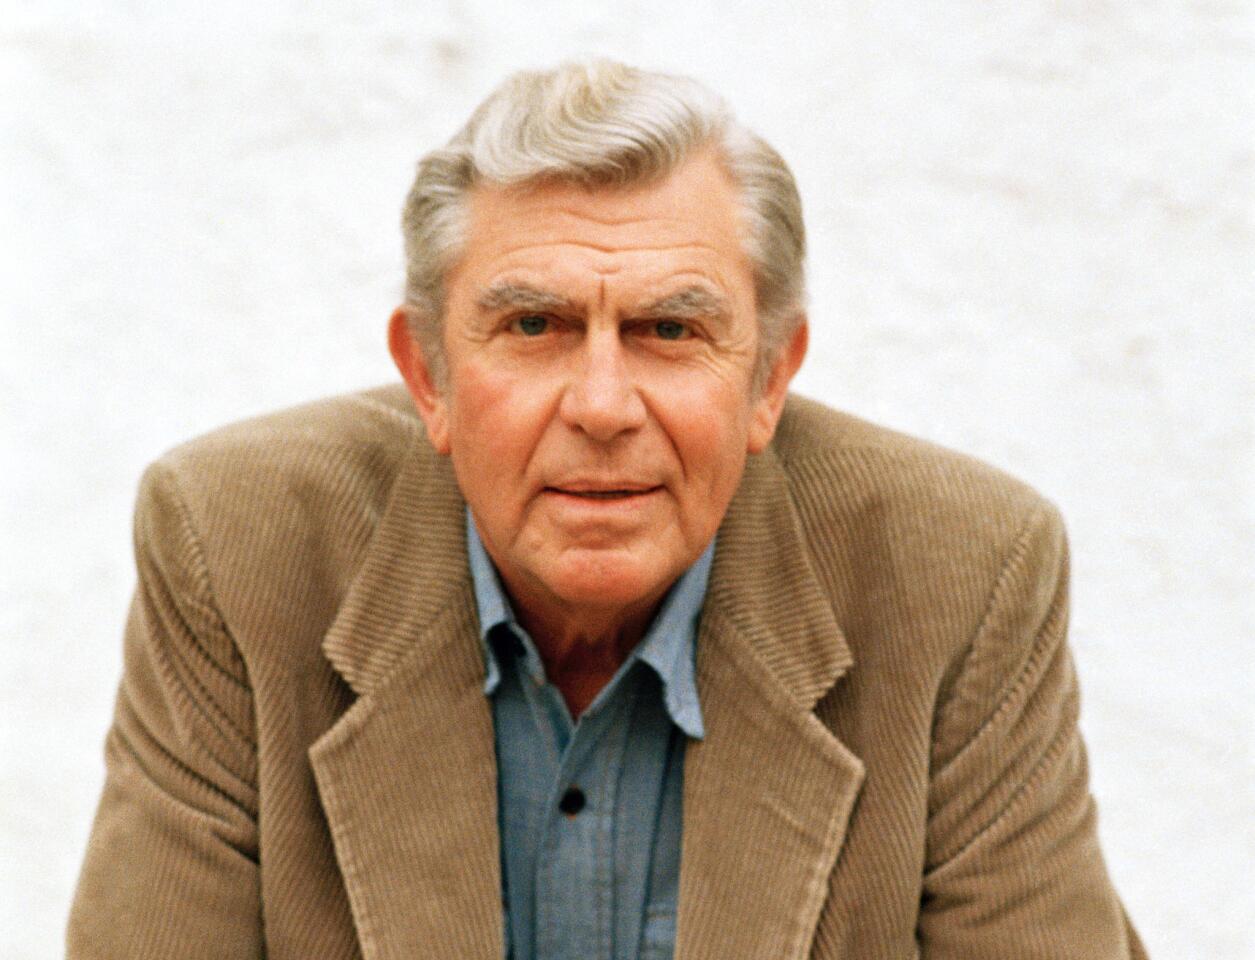 Andy Griffith dies at 86